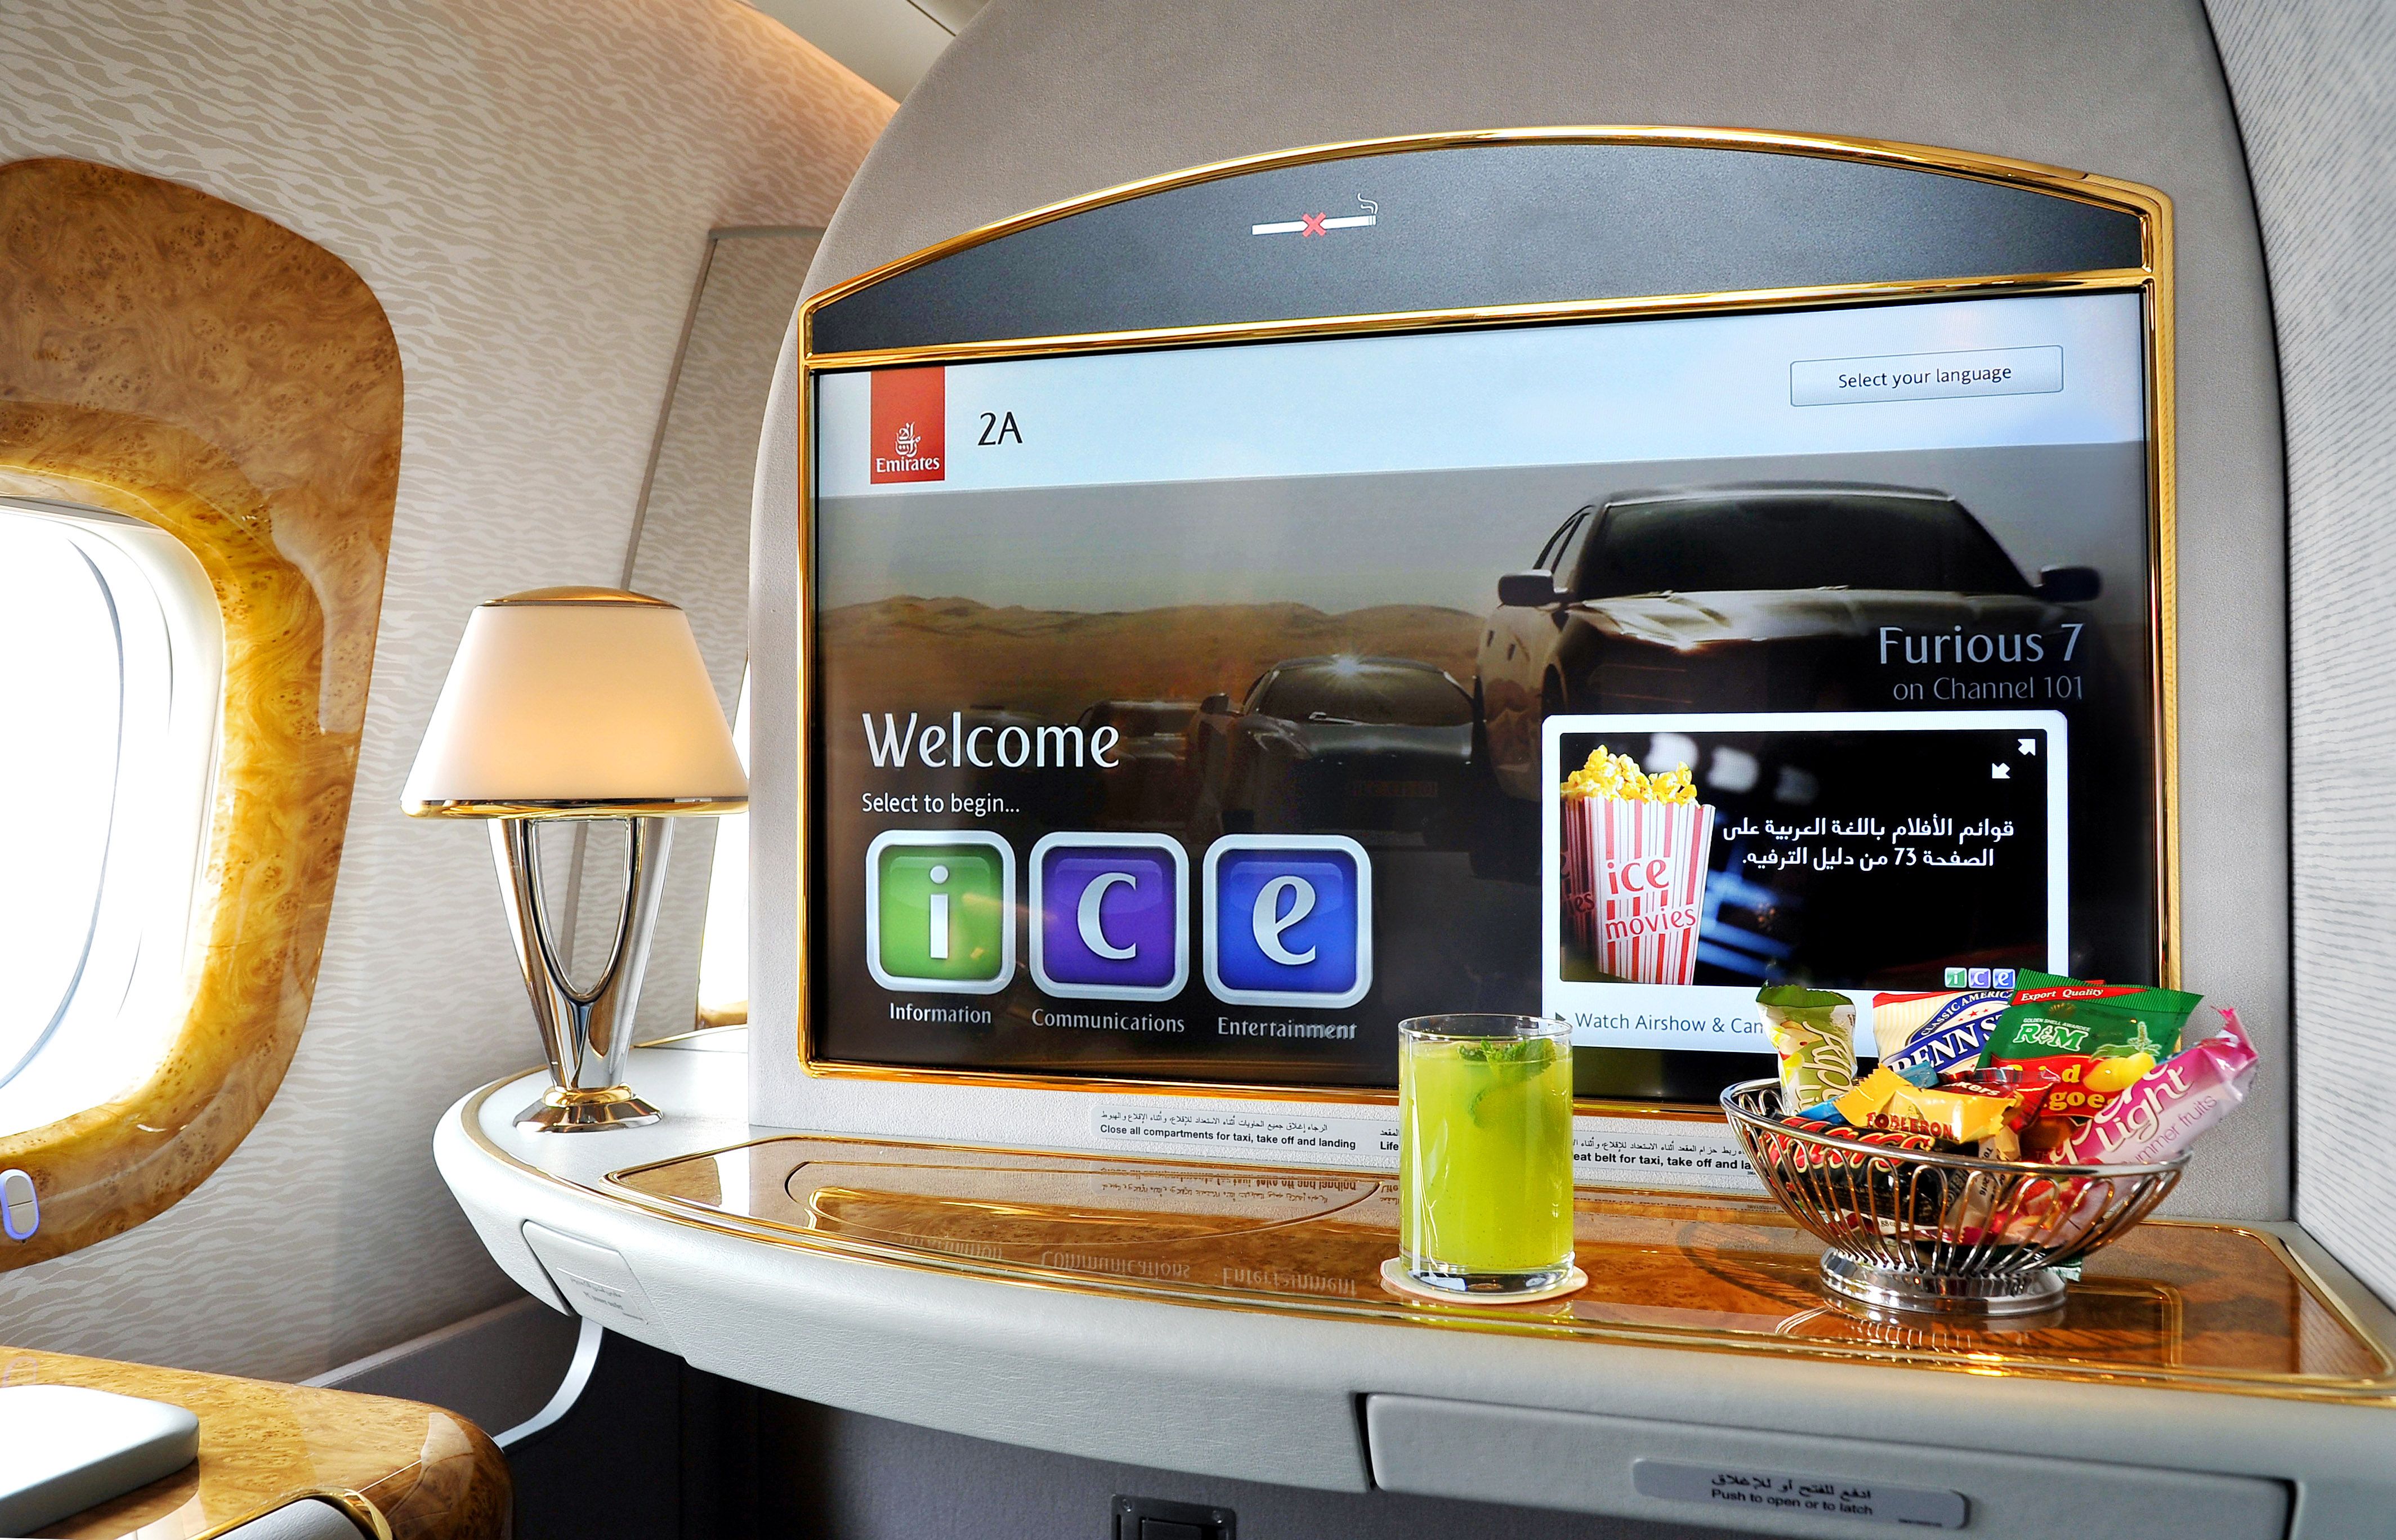 Emirates first class inflight entertainment system 